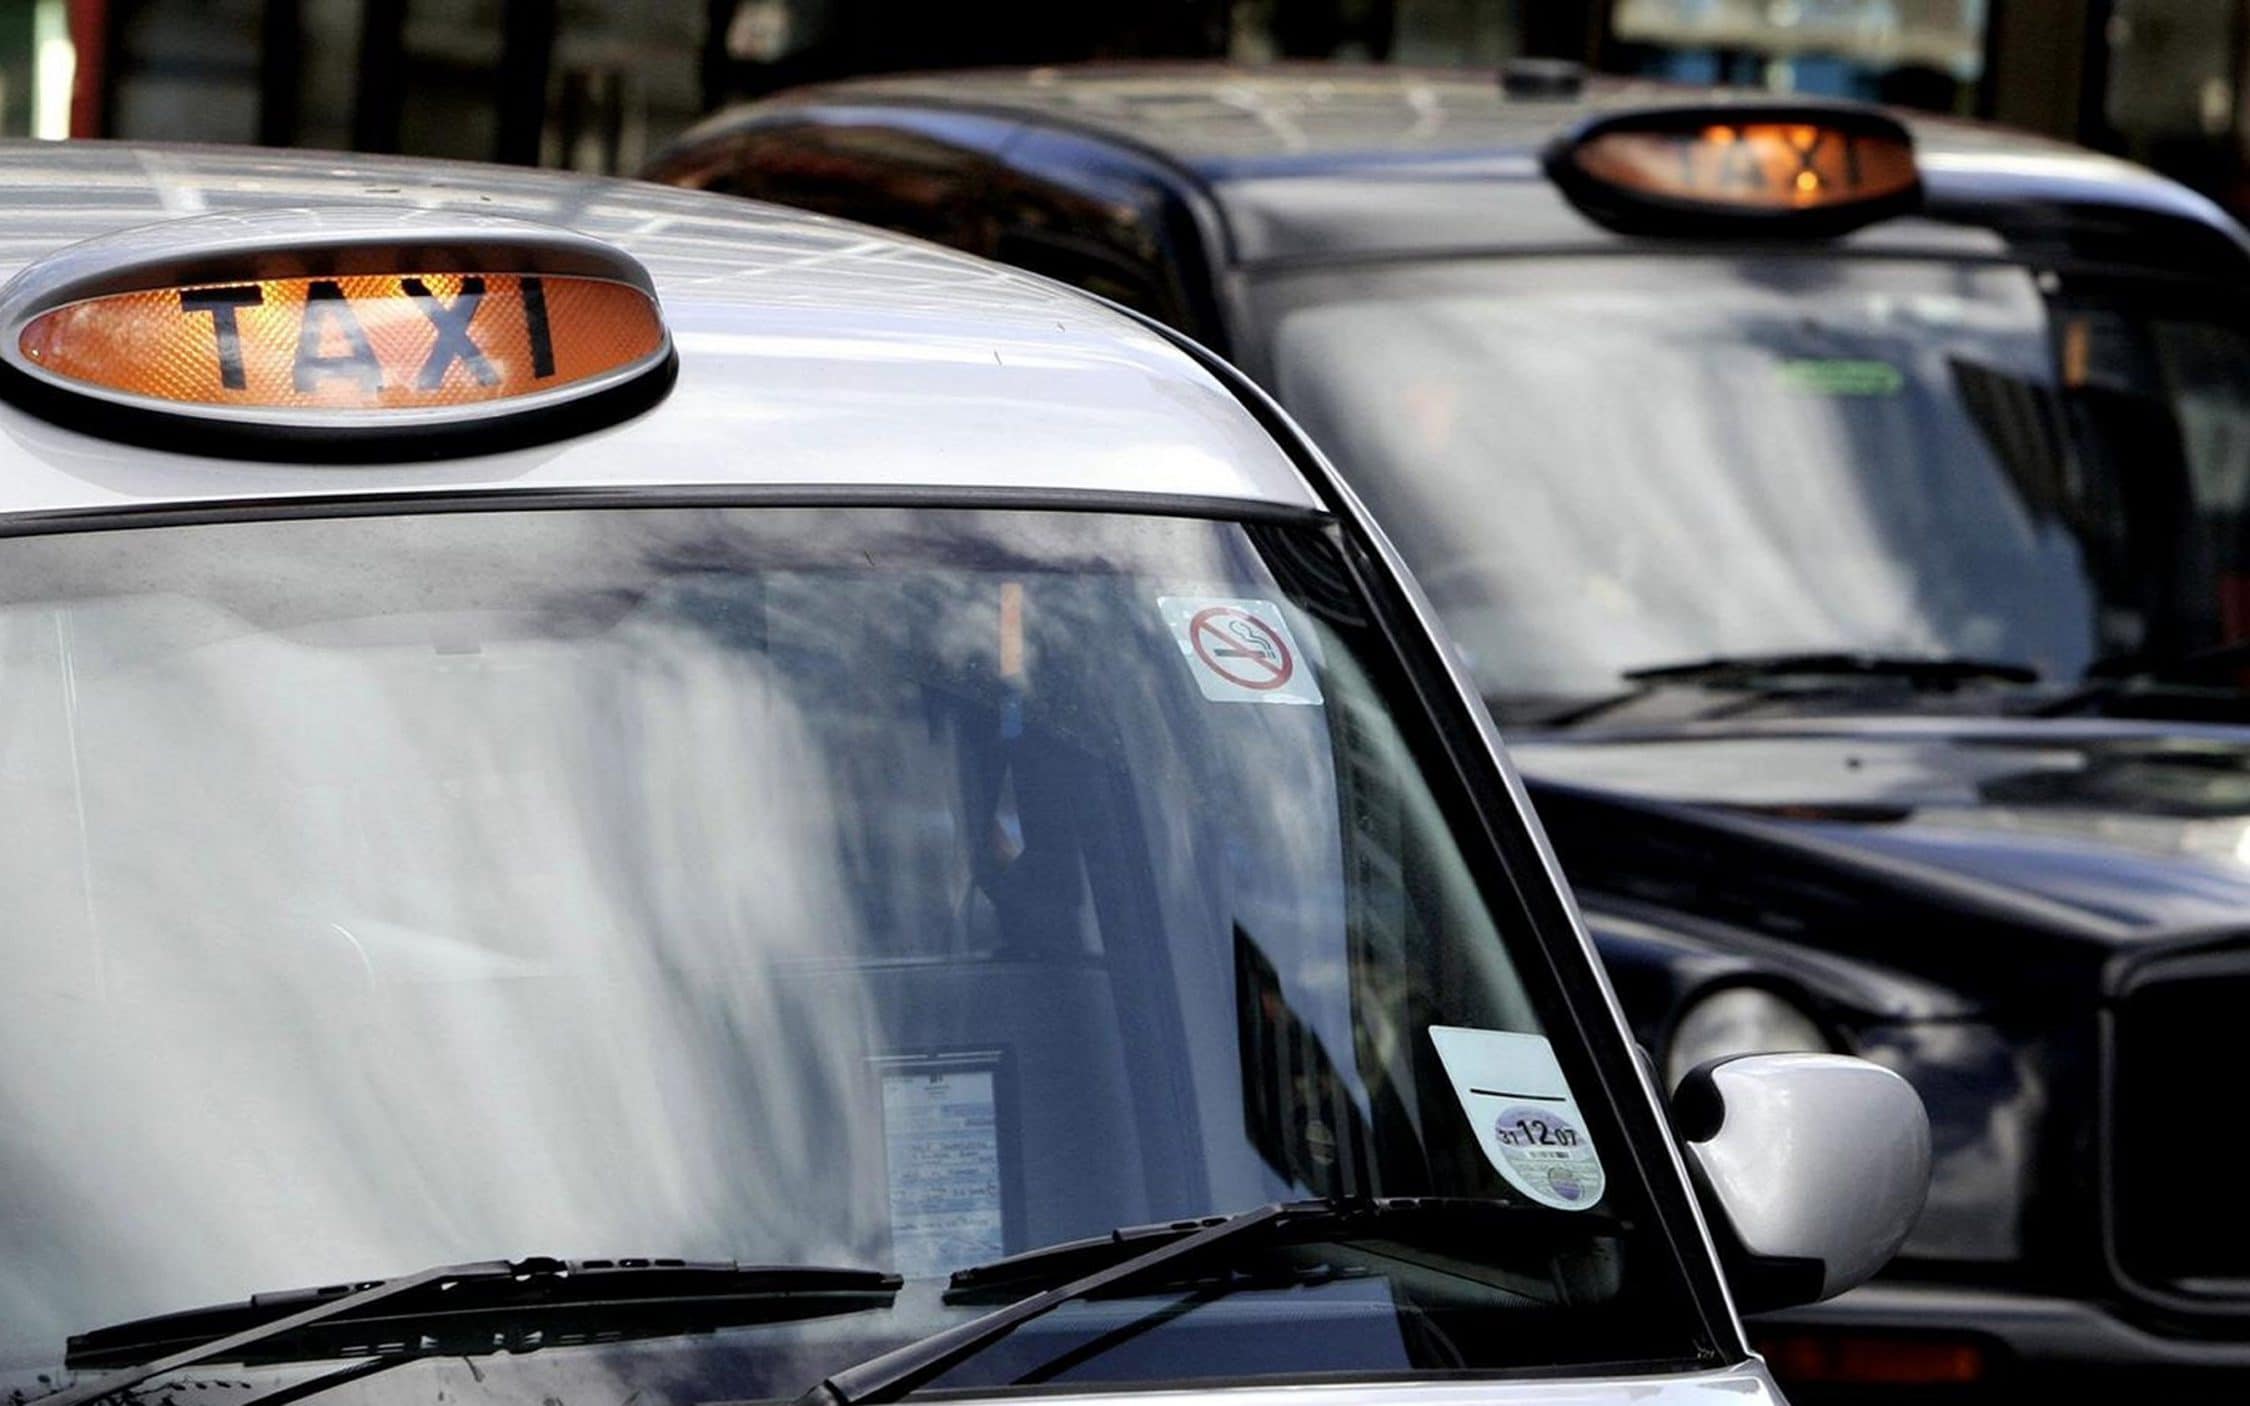 Black cabbies’ Knowledge exam could be made easier